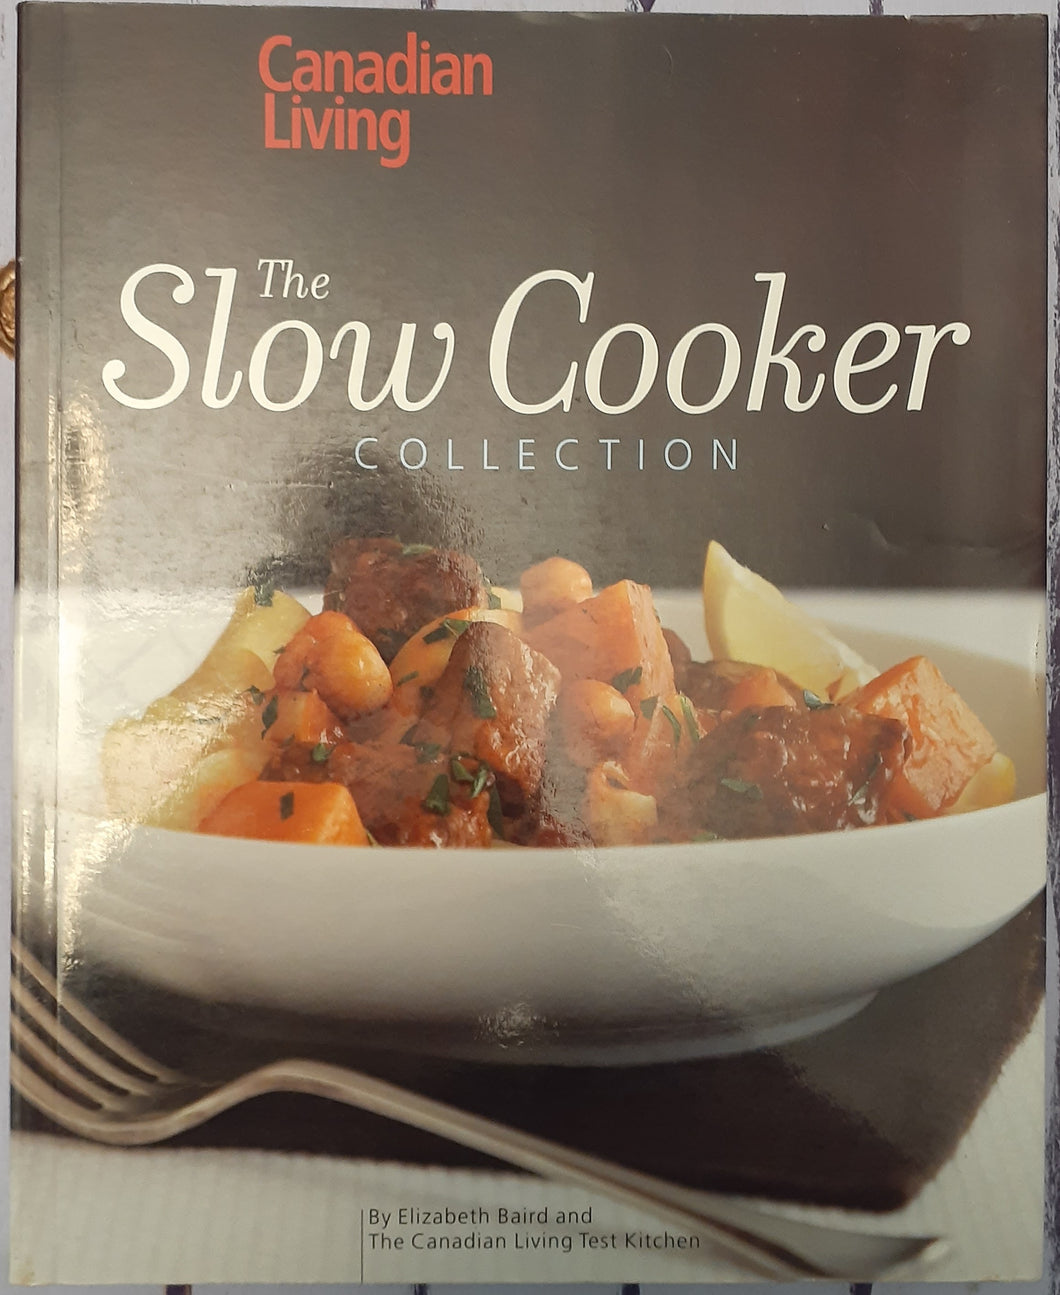 Canadian Living - The Slow Cooker Collection